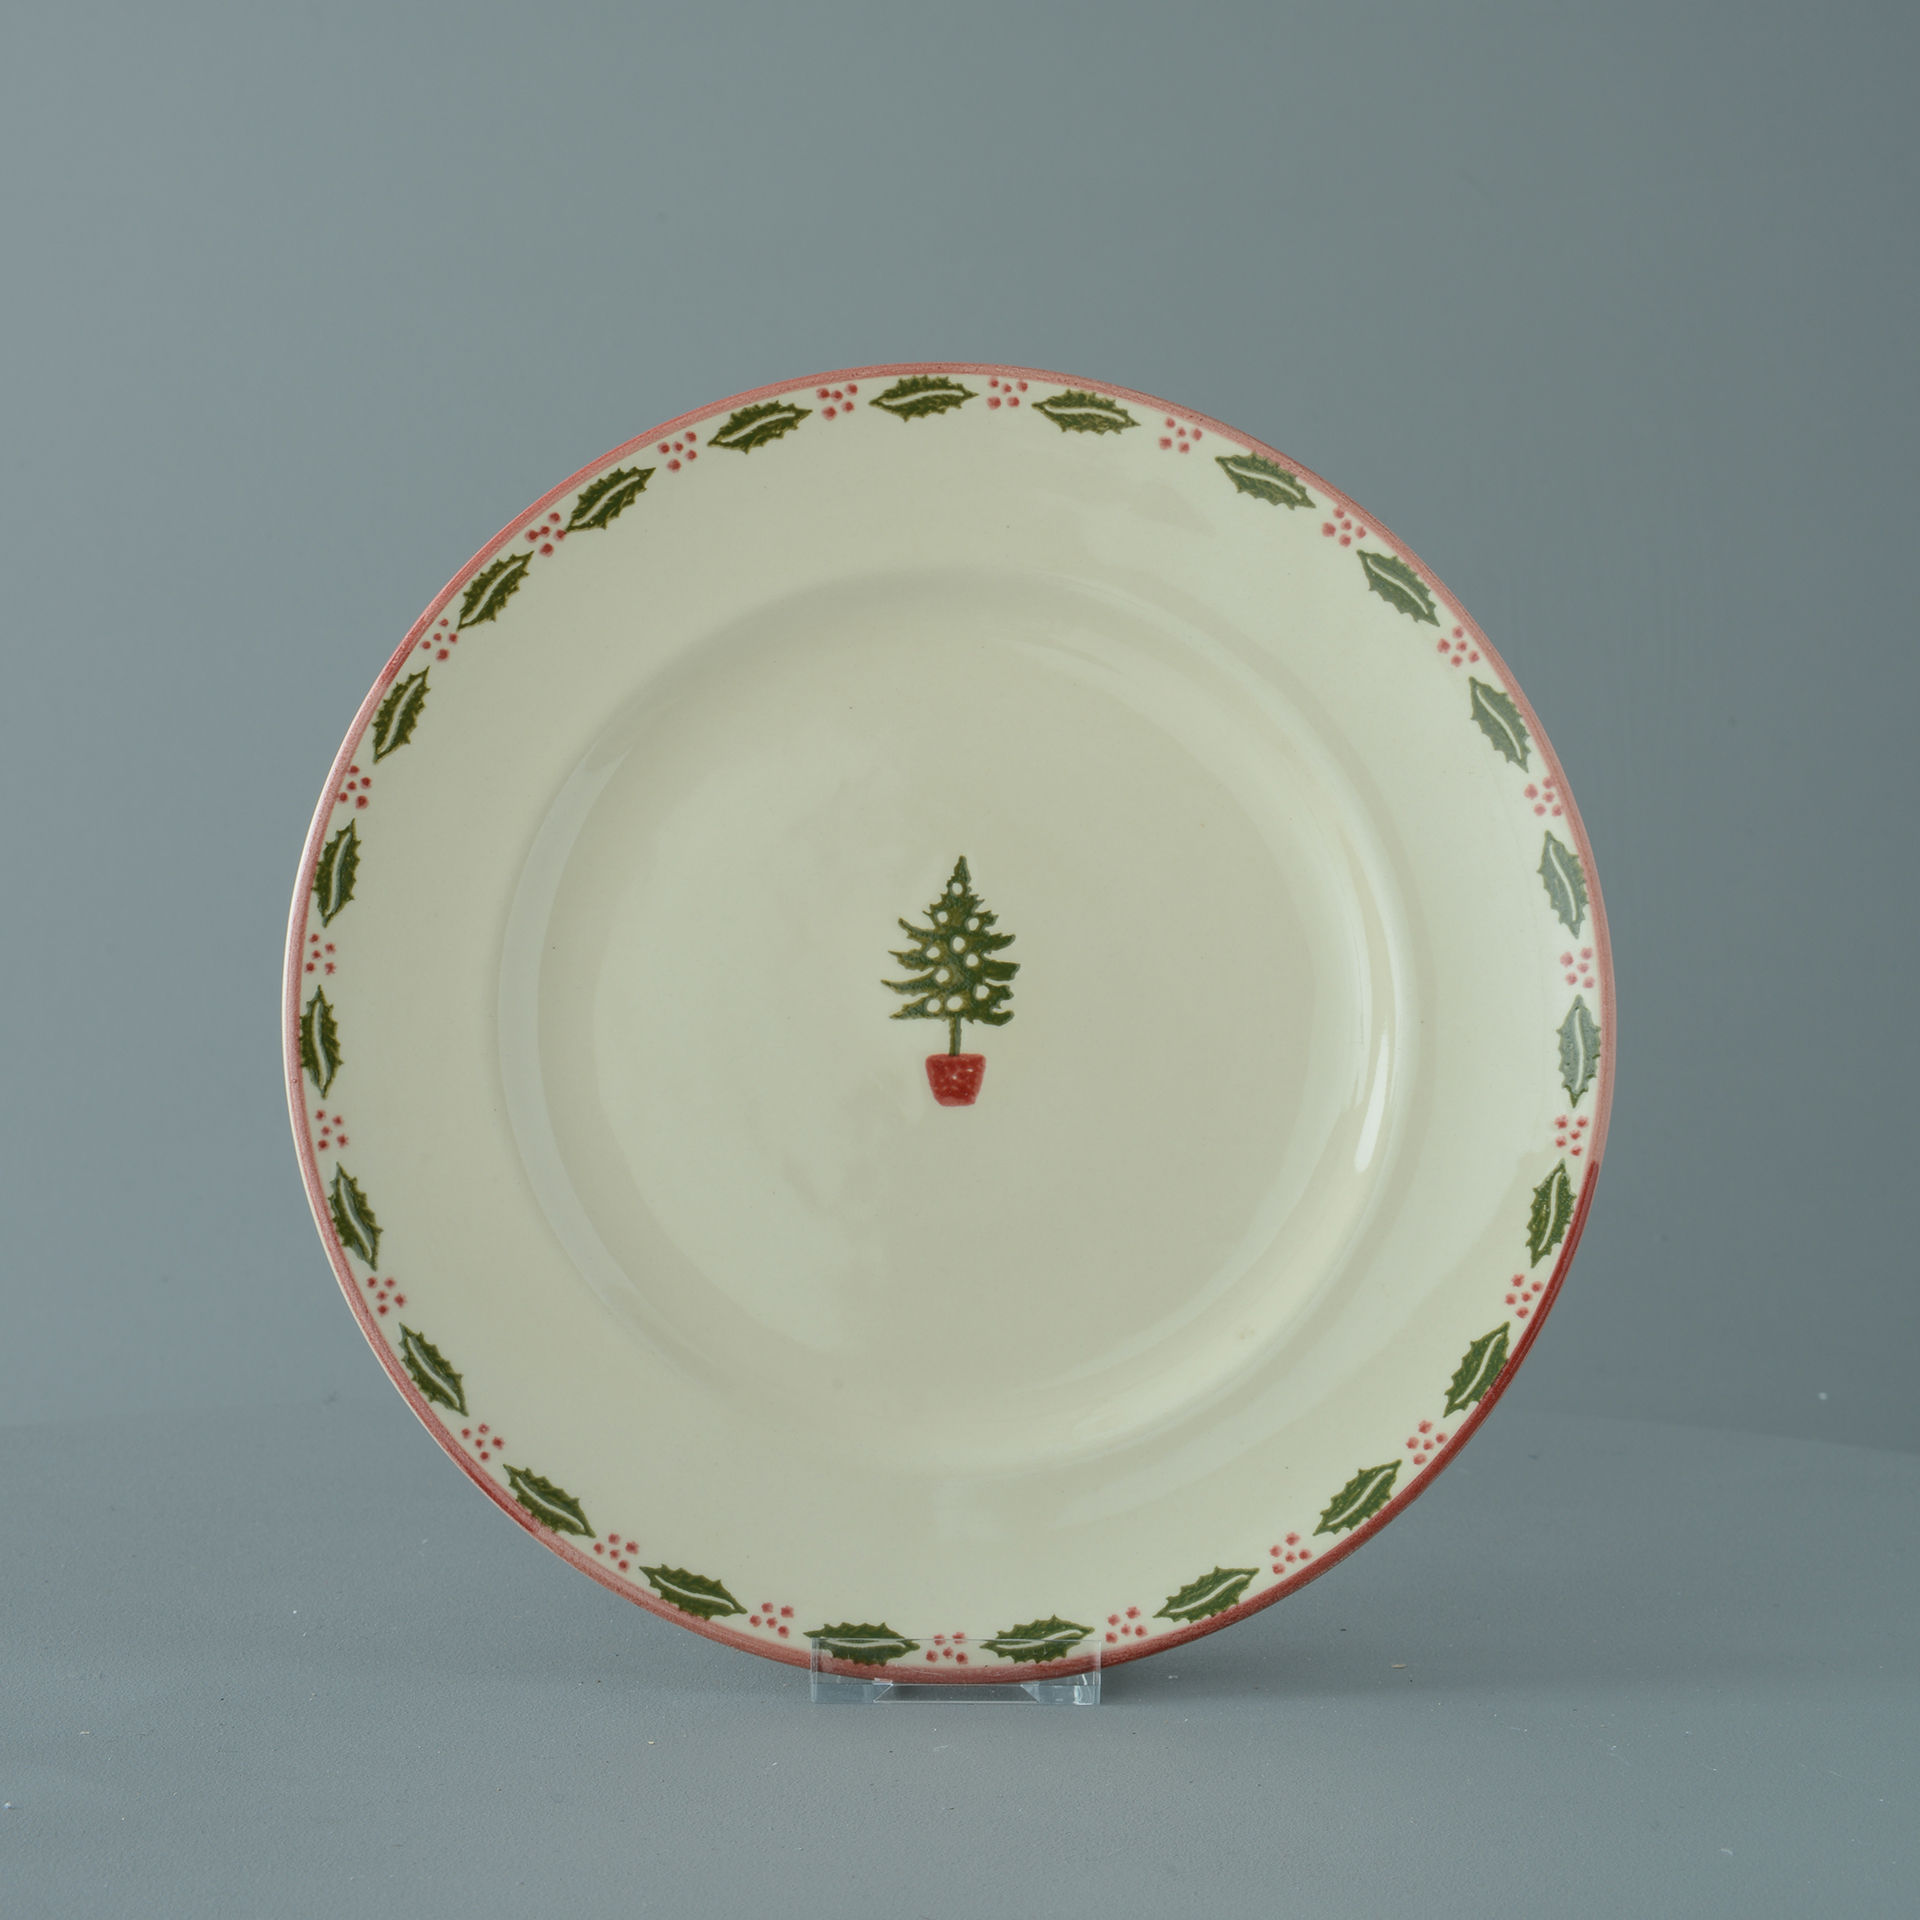 Brixton Xmas Tree & Baubles Dinner Plate 26cm Gift